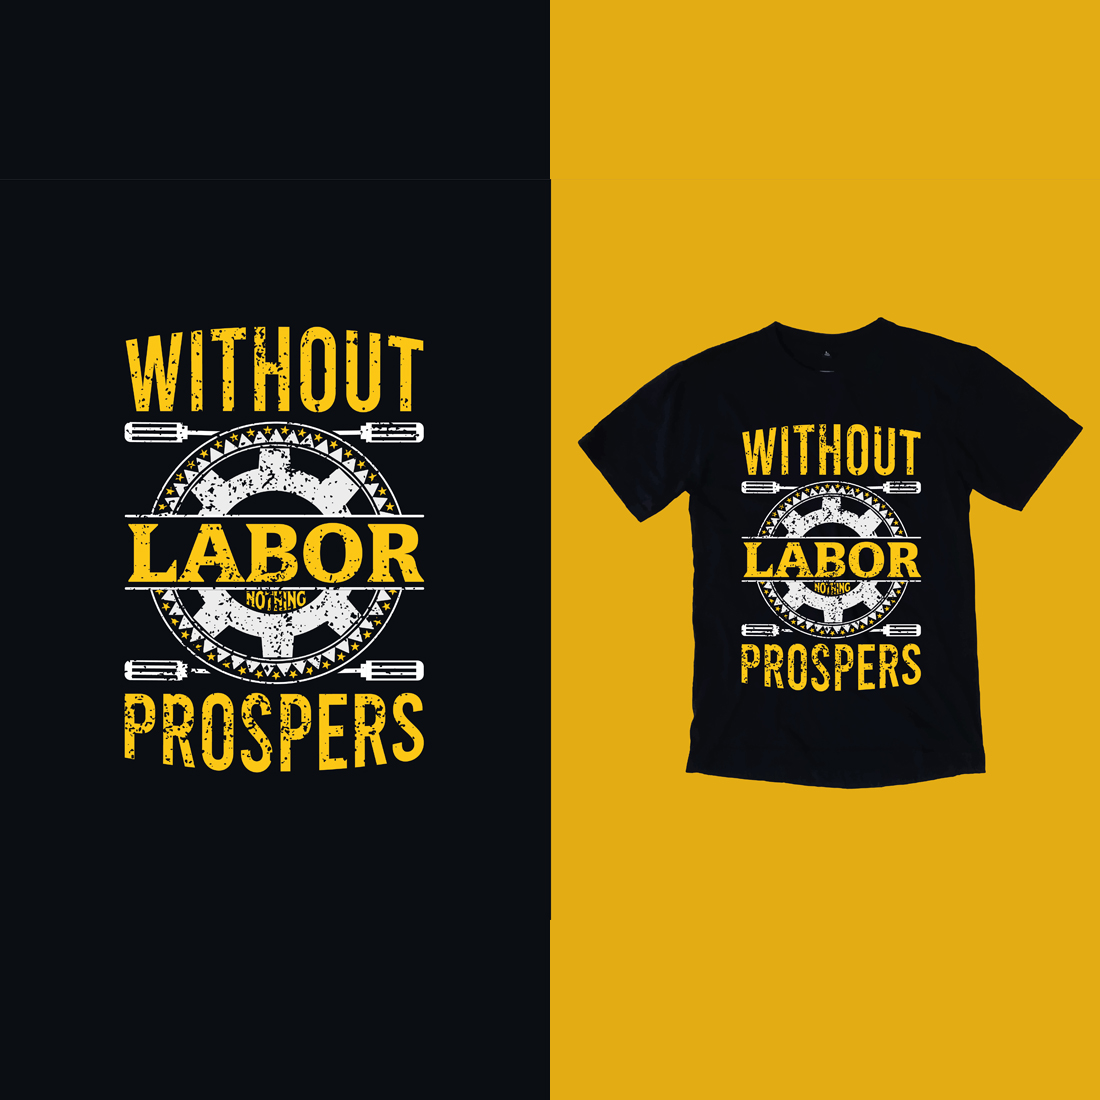 T - shirt that says without labor prospers and without labor prosper.